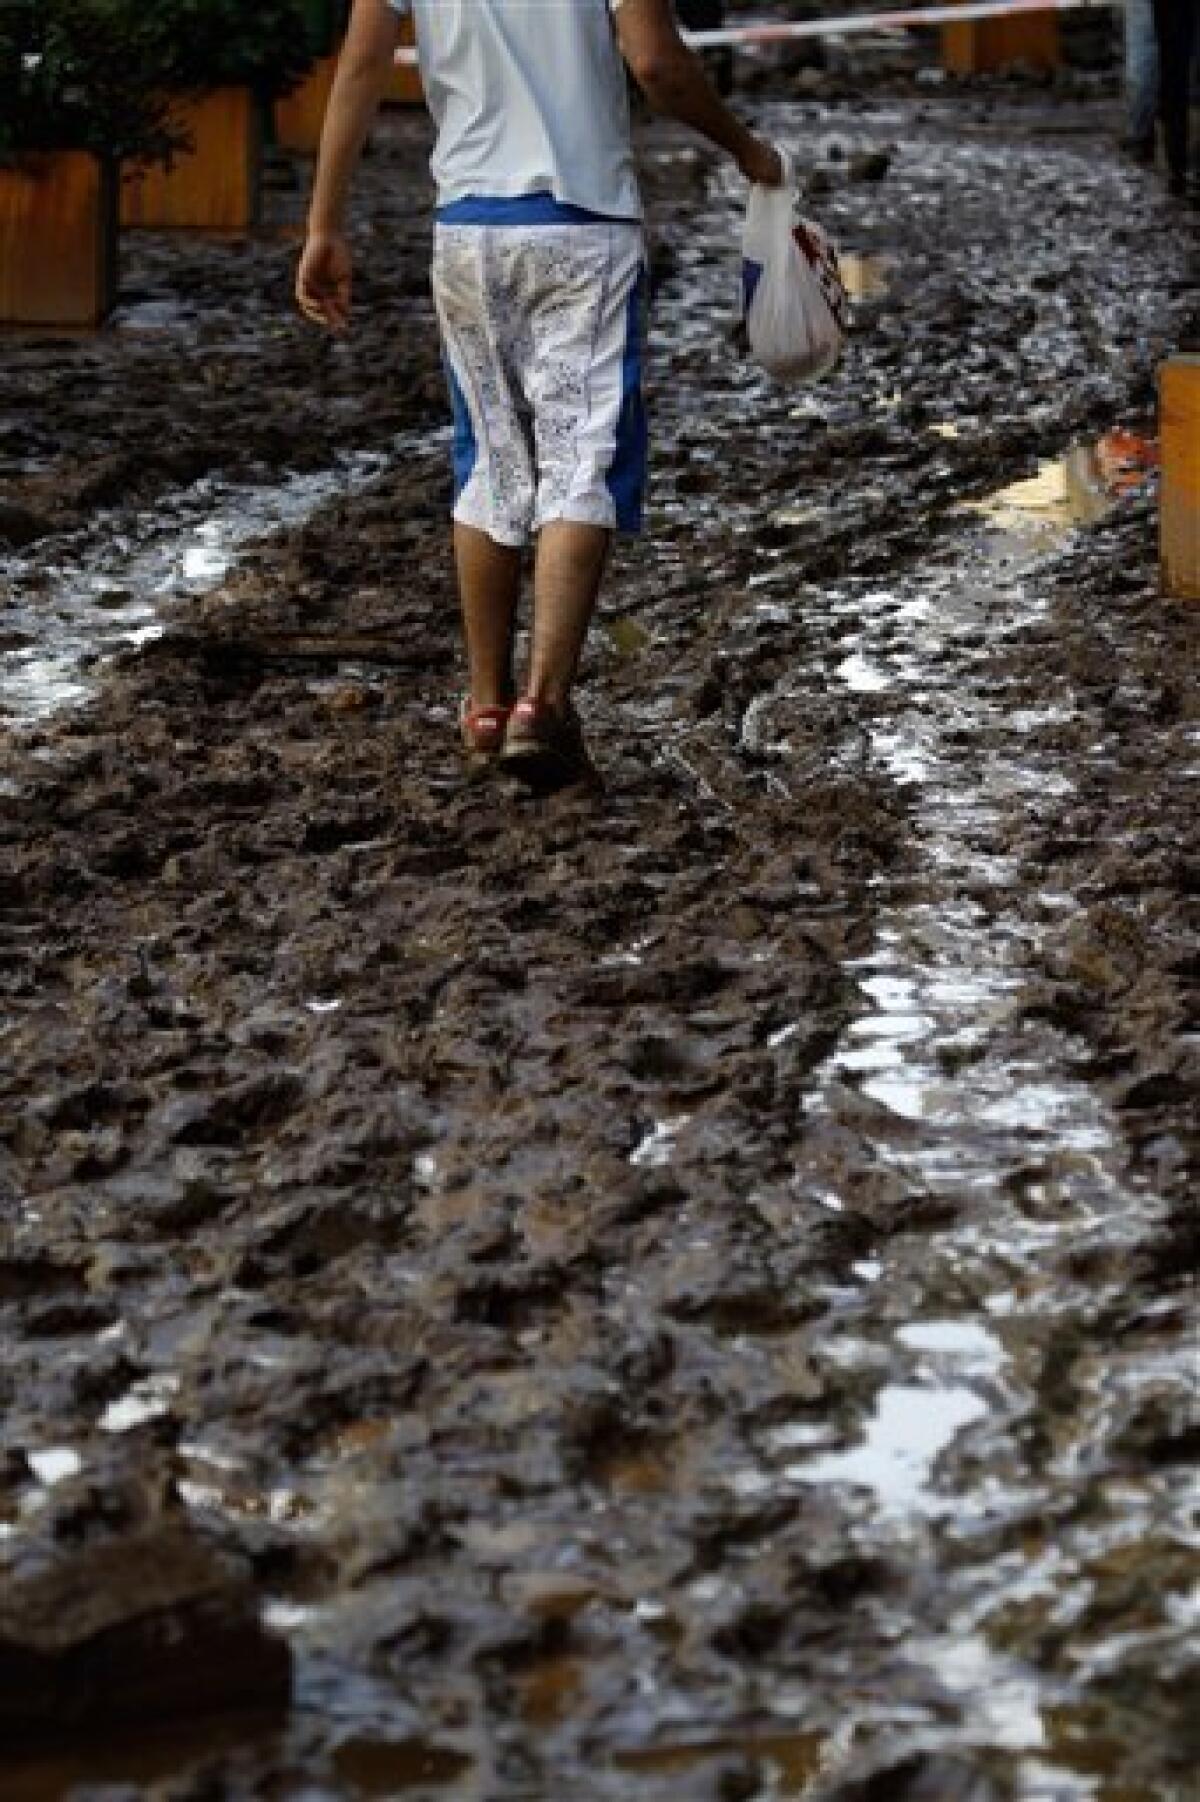 A young man walks down a street filled with mud Sunday, Feb. 21 2010, in Funchal, the Madeira Island's capital. Rocks and mud were brought down from the hills to the streets of Funchal by flash floods on Saturday and the local government has confirmed some dead. (AP Photo/Armando Franca)